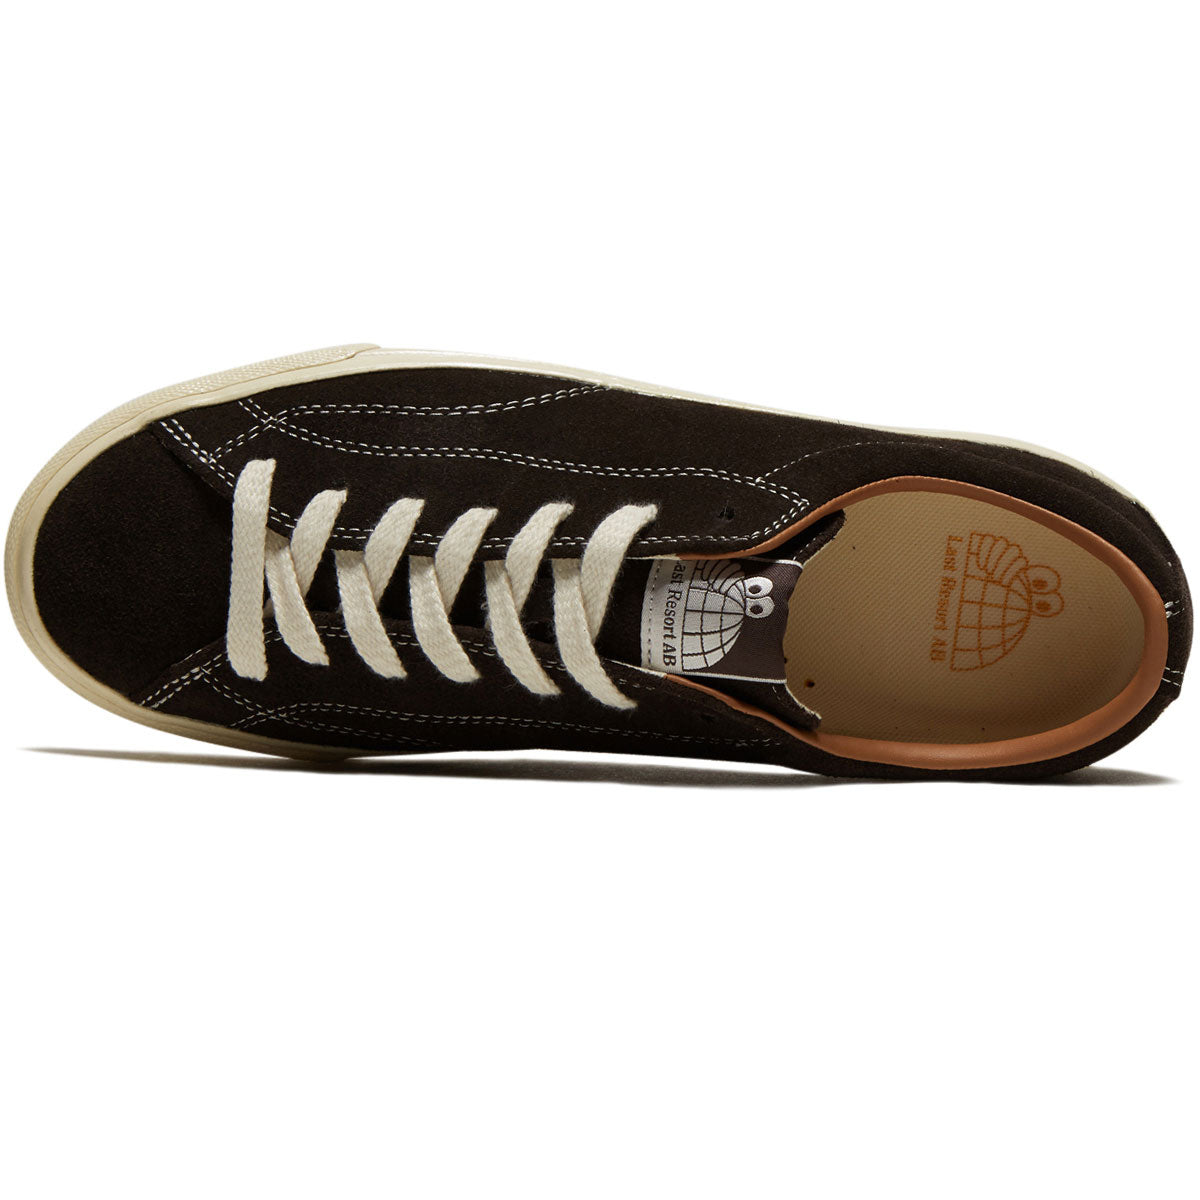 Last Resort AB VM003 Lo Suede Shoes - Coffee Bean/White image 3